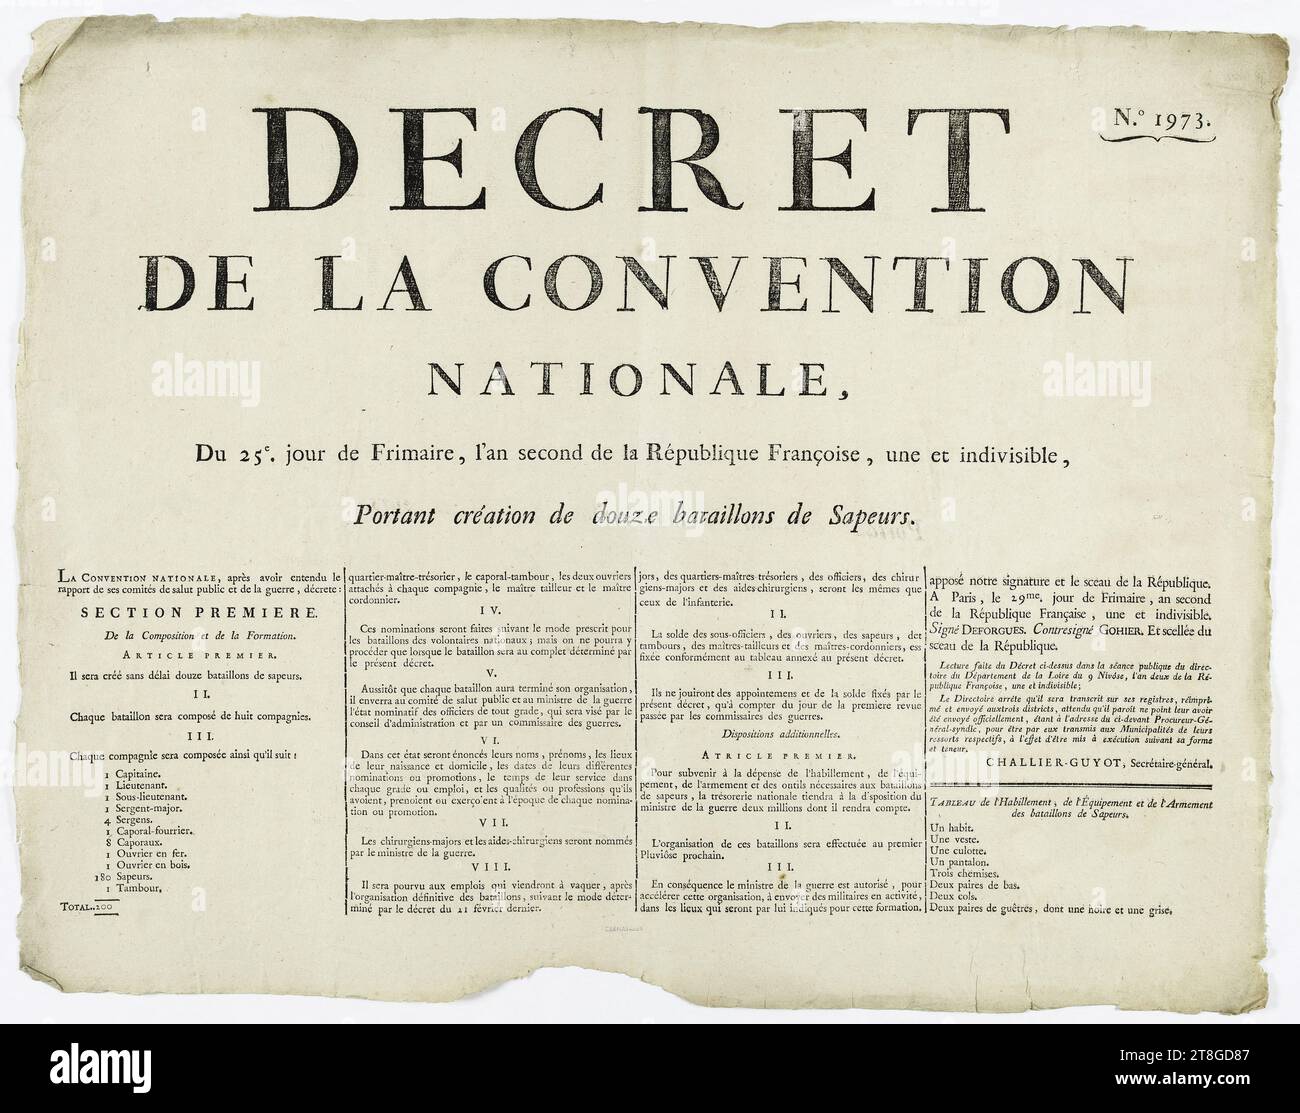 No. 1973., DECREE, OF THE CONVENTION, NATIONAL, Of the 25th. day of Frimaire, the second year of the French Republic sic, one and indivisible, Creating twelve battalions of Sapeurs, In 1793, Graphic arts, Manuscripts, printed matter, binding, Poster, Typography u003d letterpress printing, Dimensions - Work: Height: 41.2 cm, Width: 52.7 cm Stock Photo